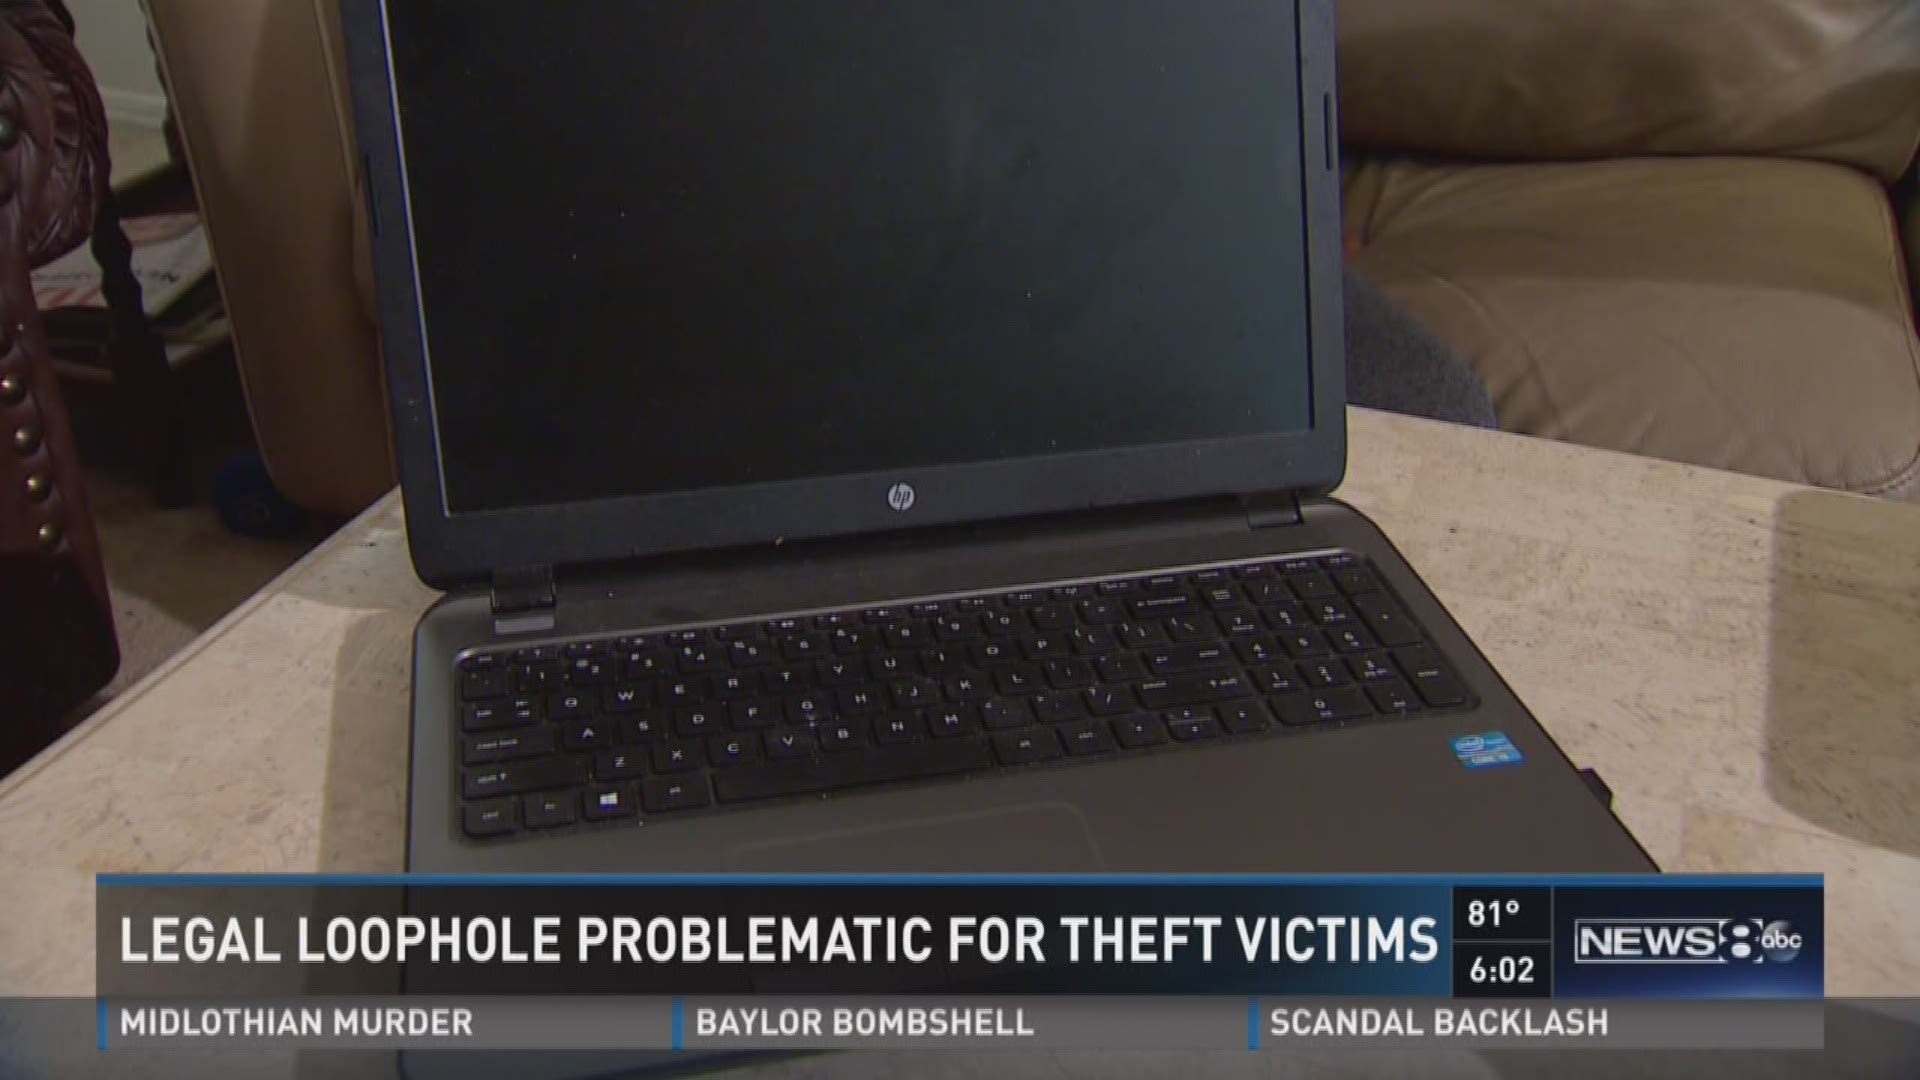 Legal loophole problematic for theft victims